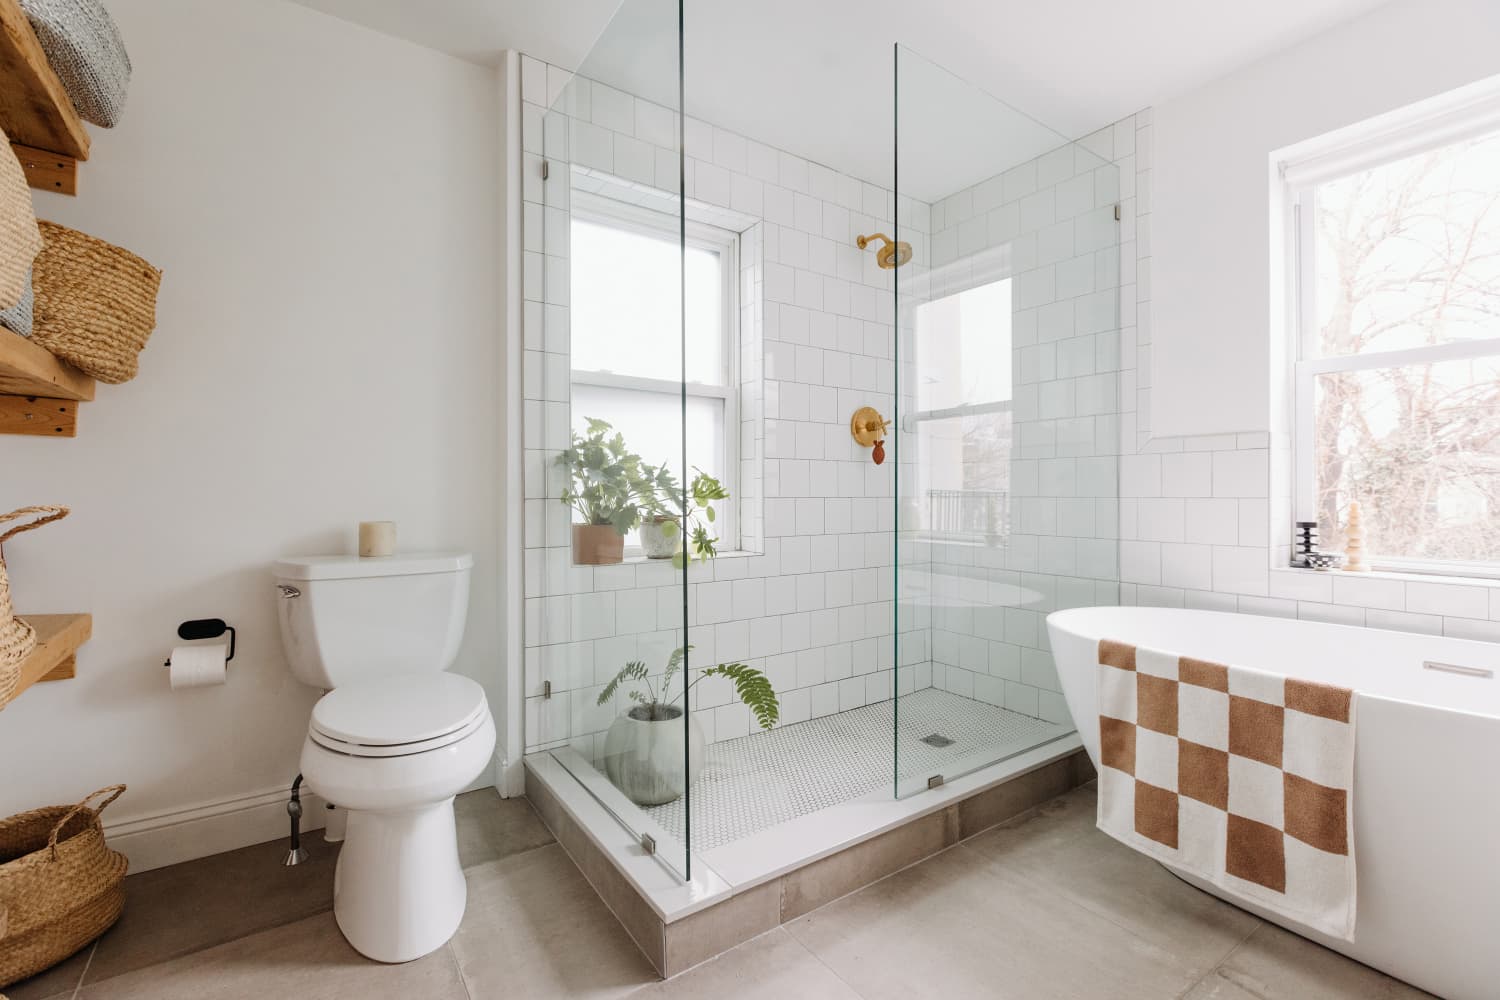 These Walk-In Shower Ideas Will Help You Find Your Zen